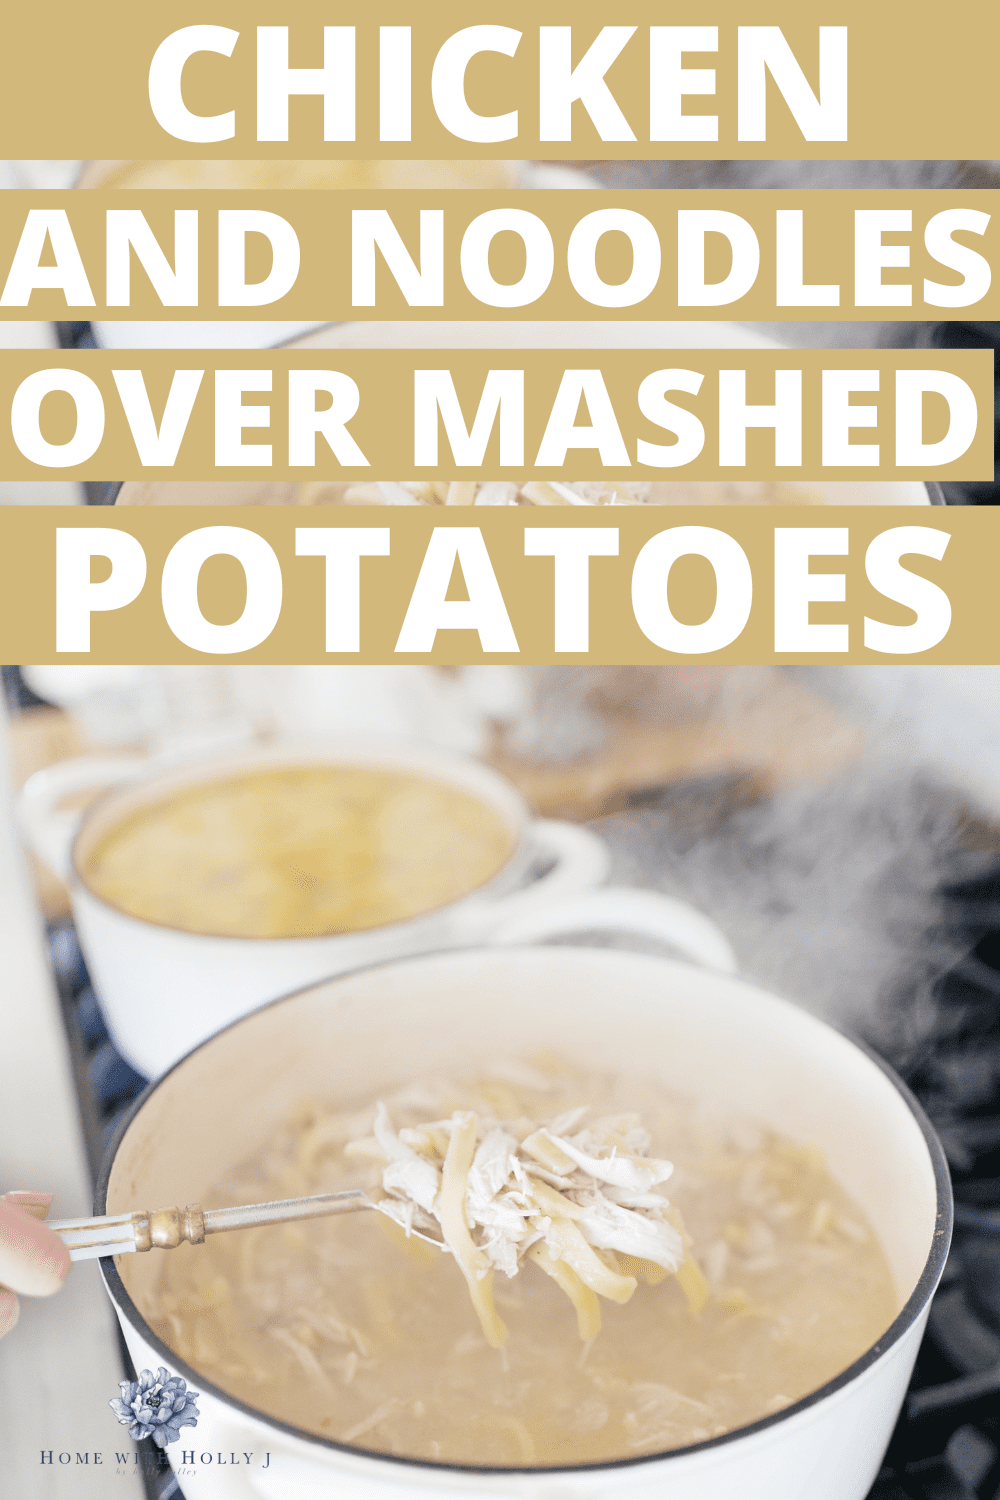 Sharing the easiest and yummiest Homemade chicken and noodles recipe with mashed potatoes that has been passed down for four generations